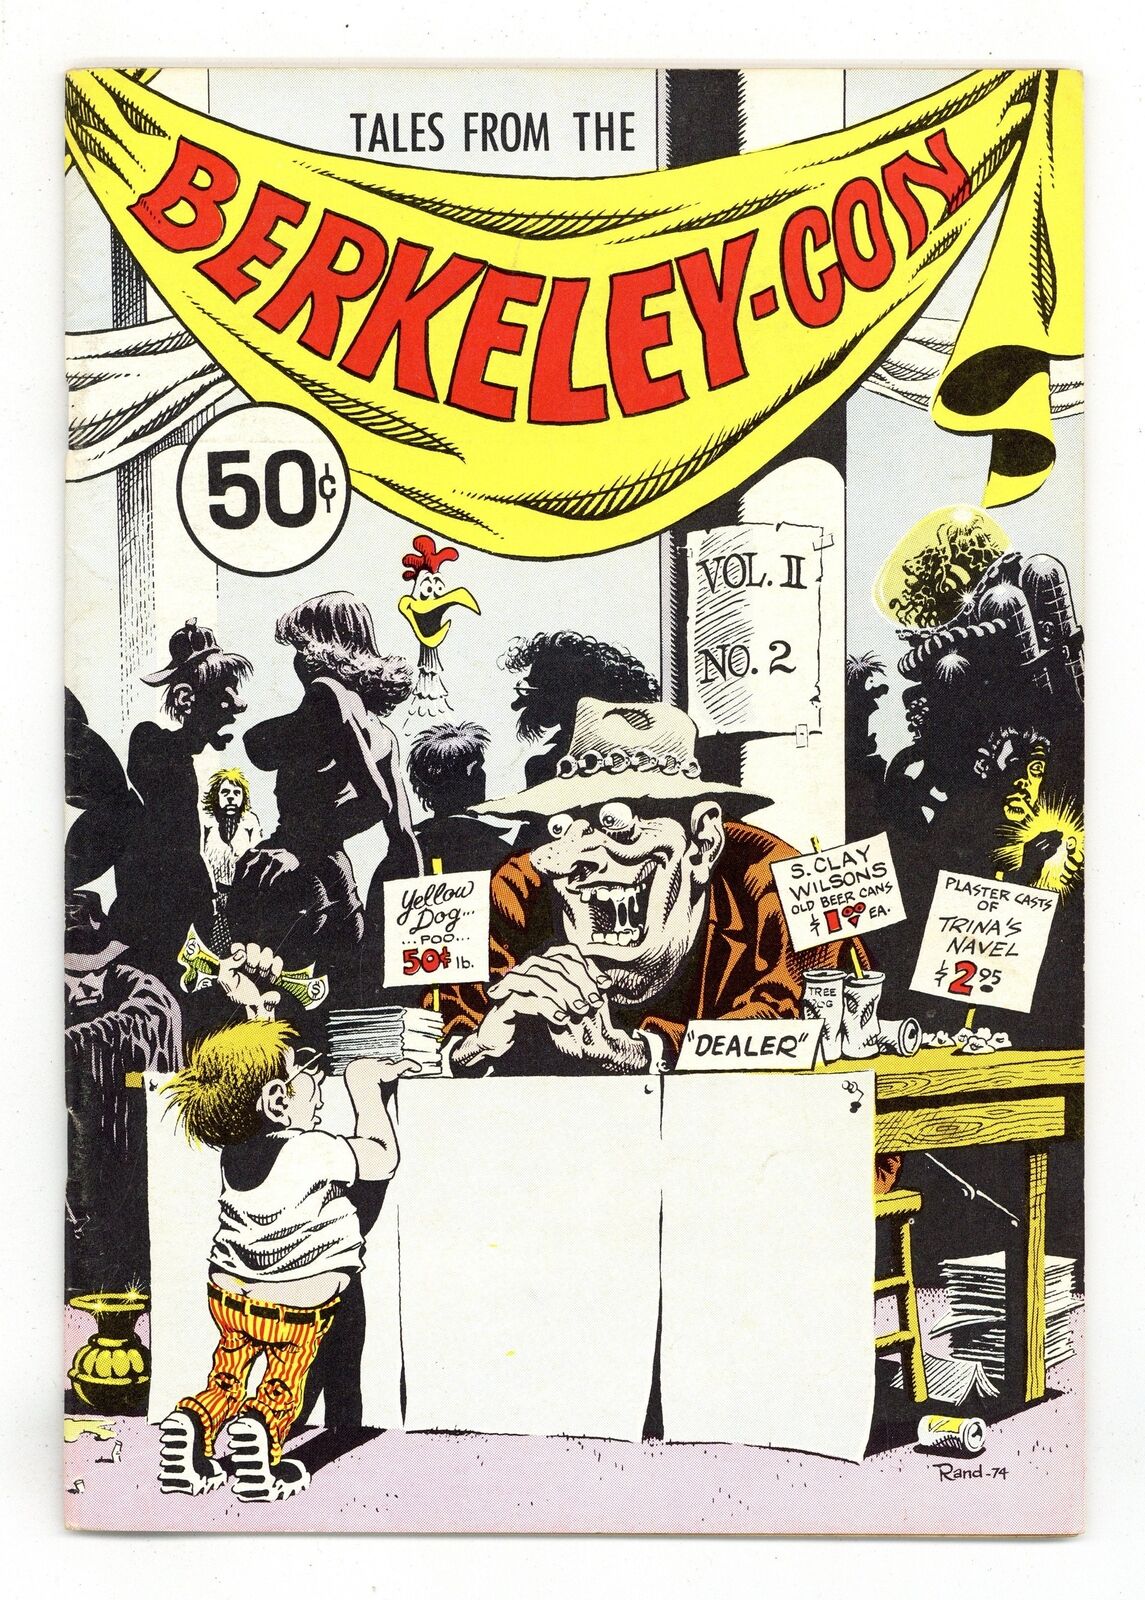 Tales from the Berkeley-Con #2 VG/FN 5.0 1974